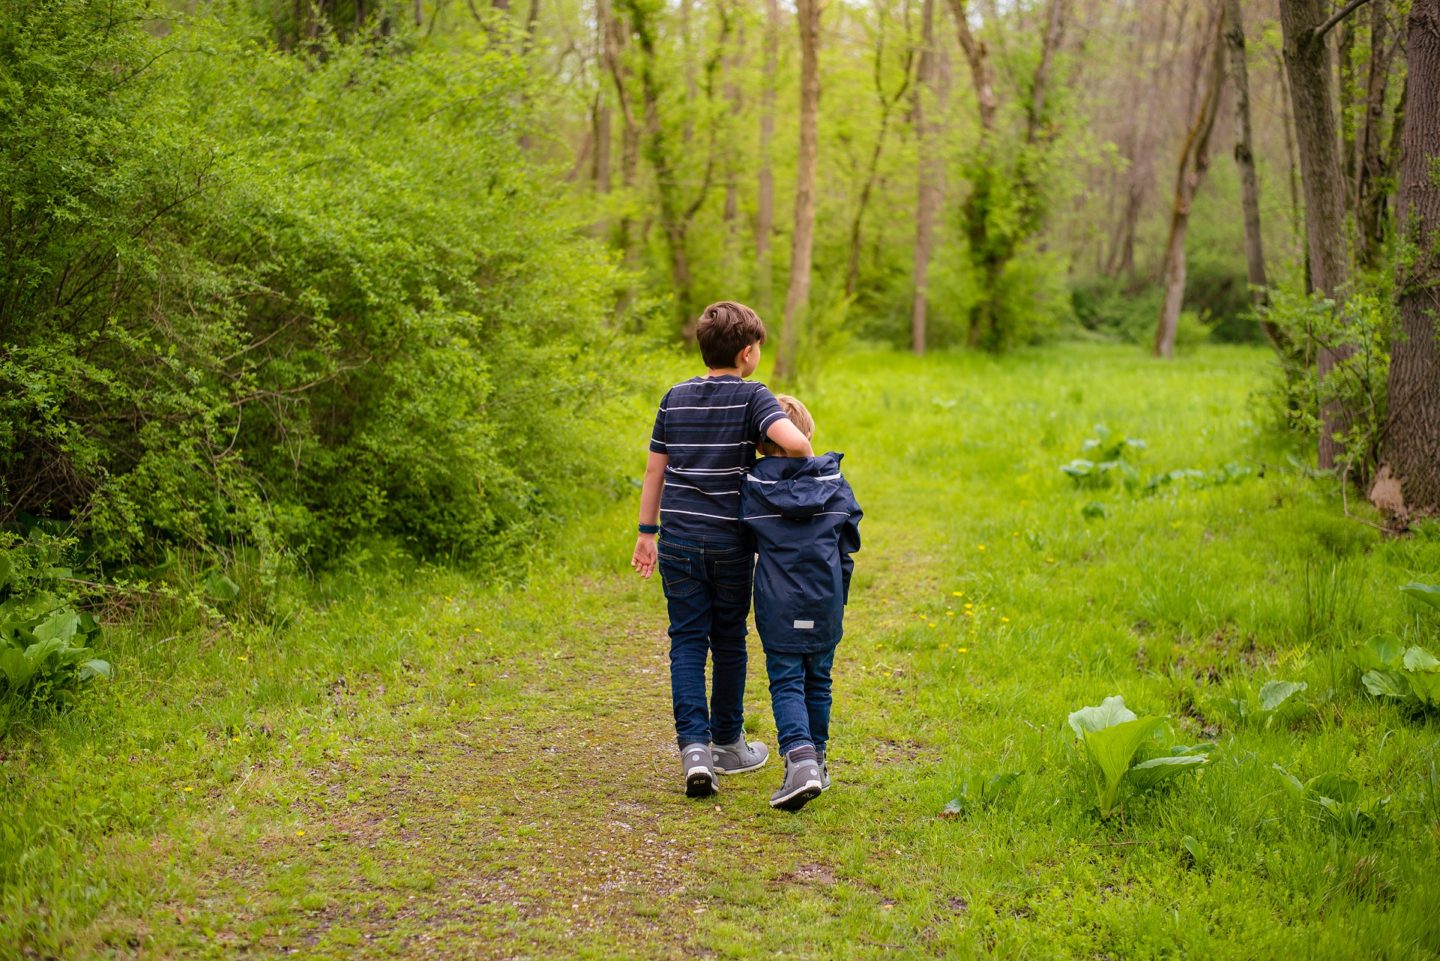 5 ways to get kids outside during the school year by Julie McNulty for Hike it Baby